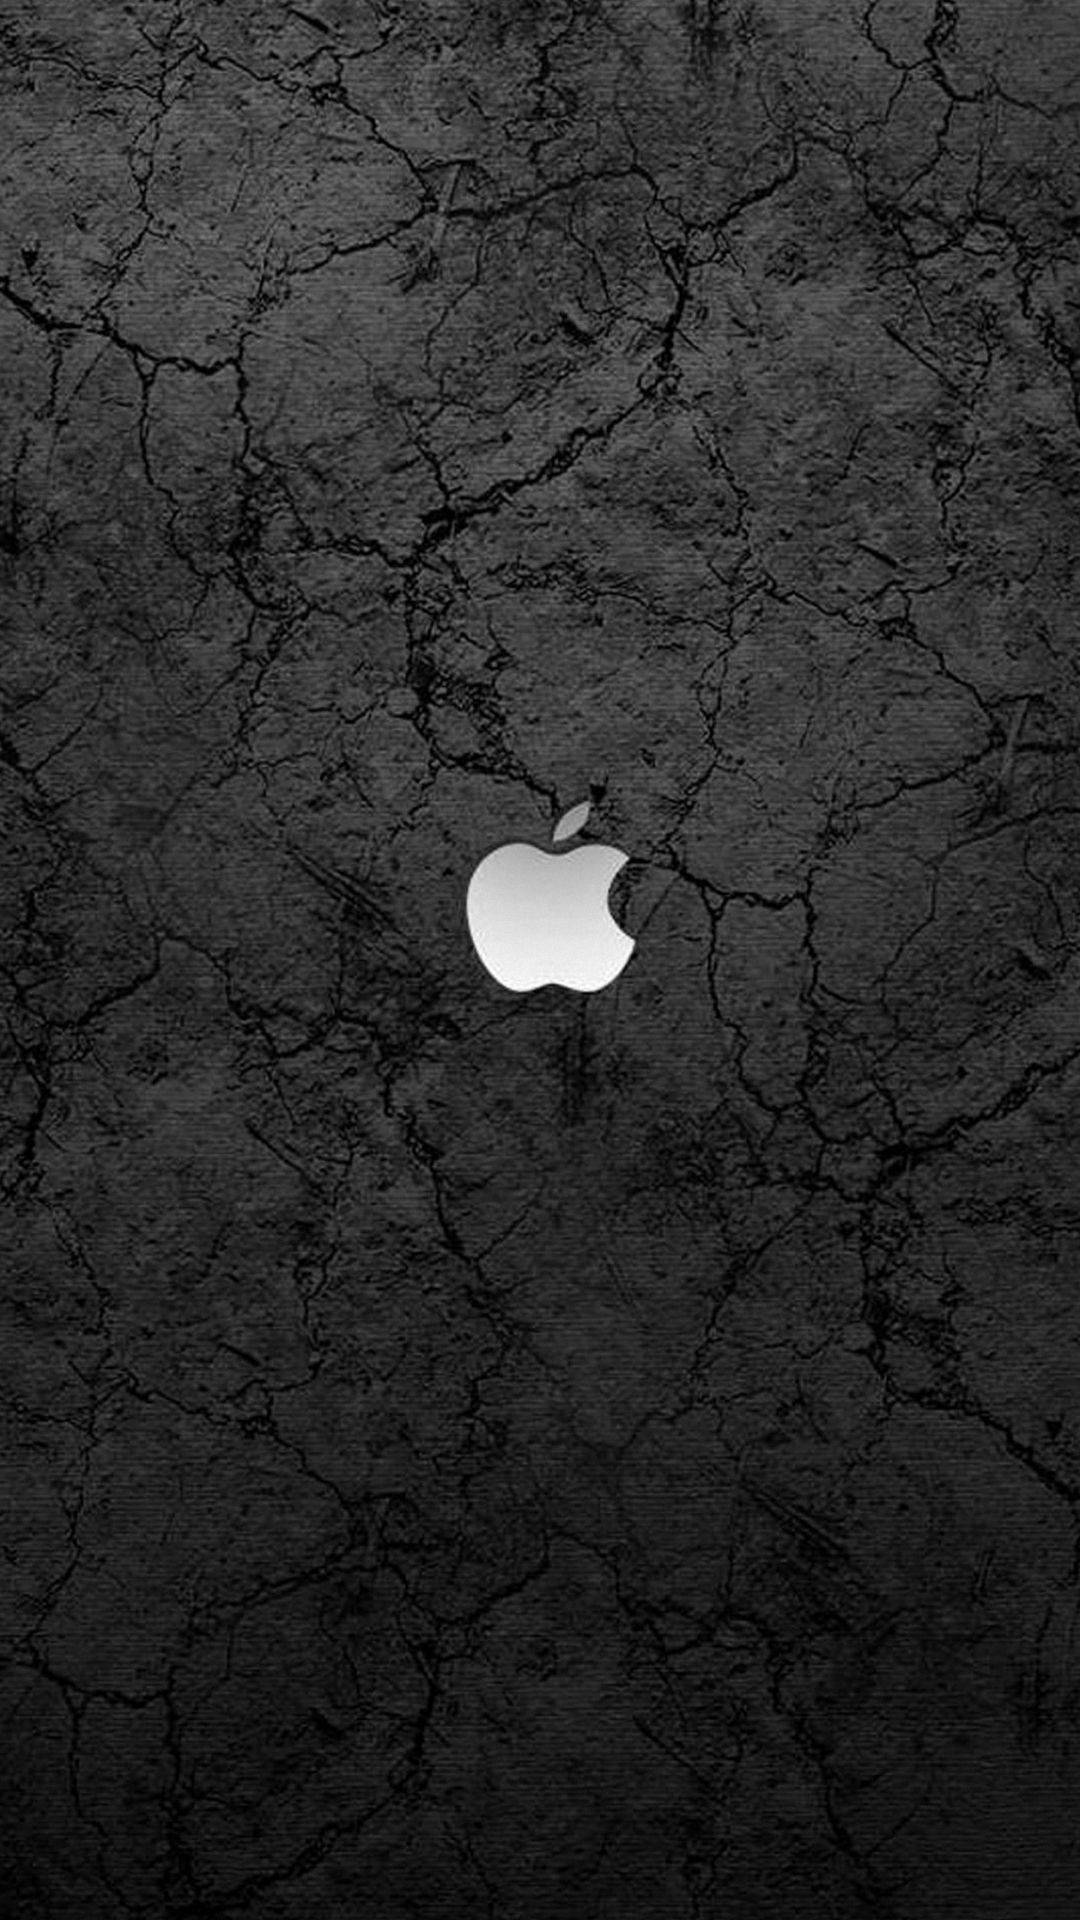 Strategically Placed Apple Logo Against A Cracked Concrete Backdrop.